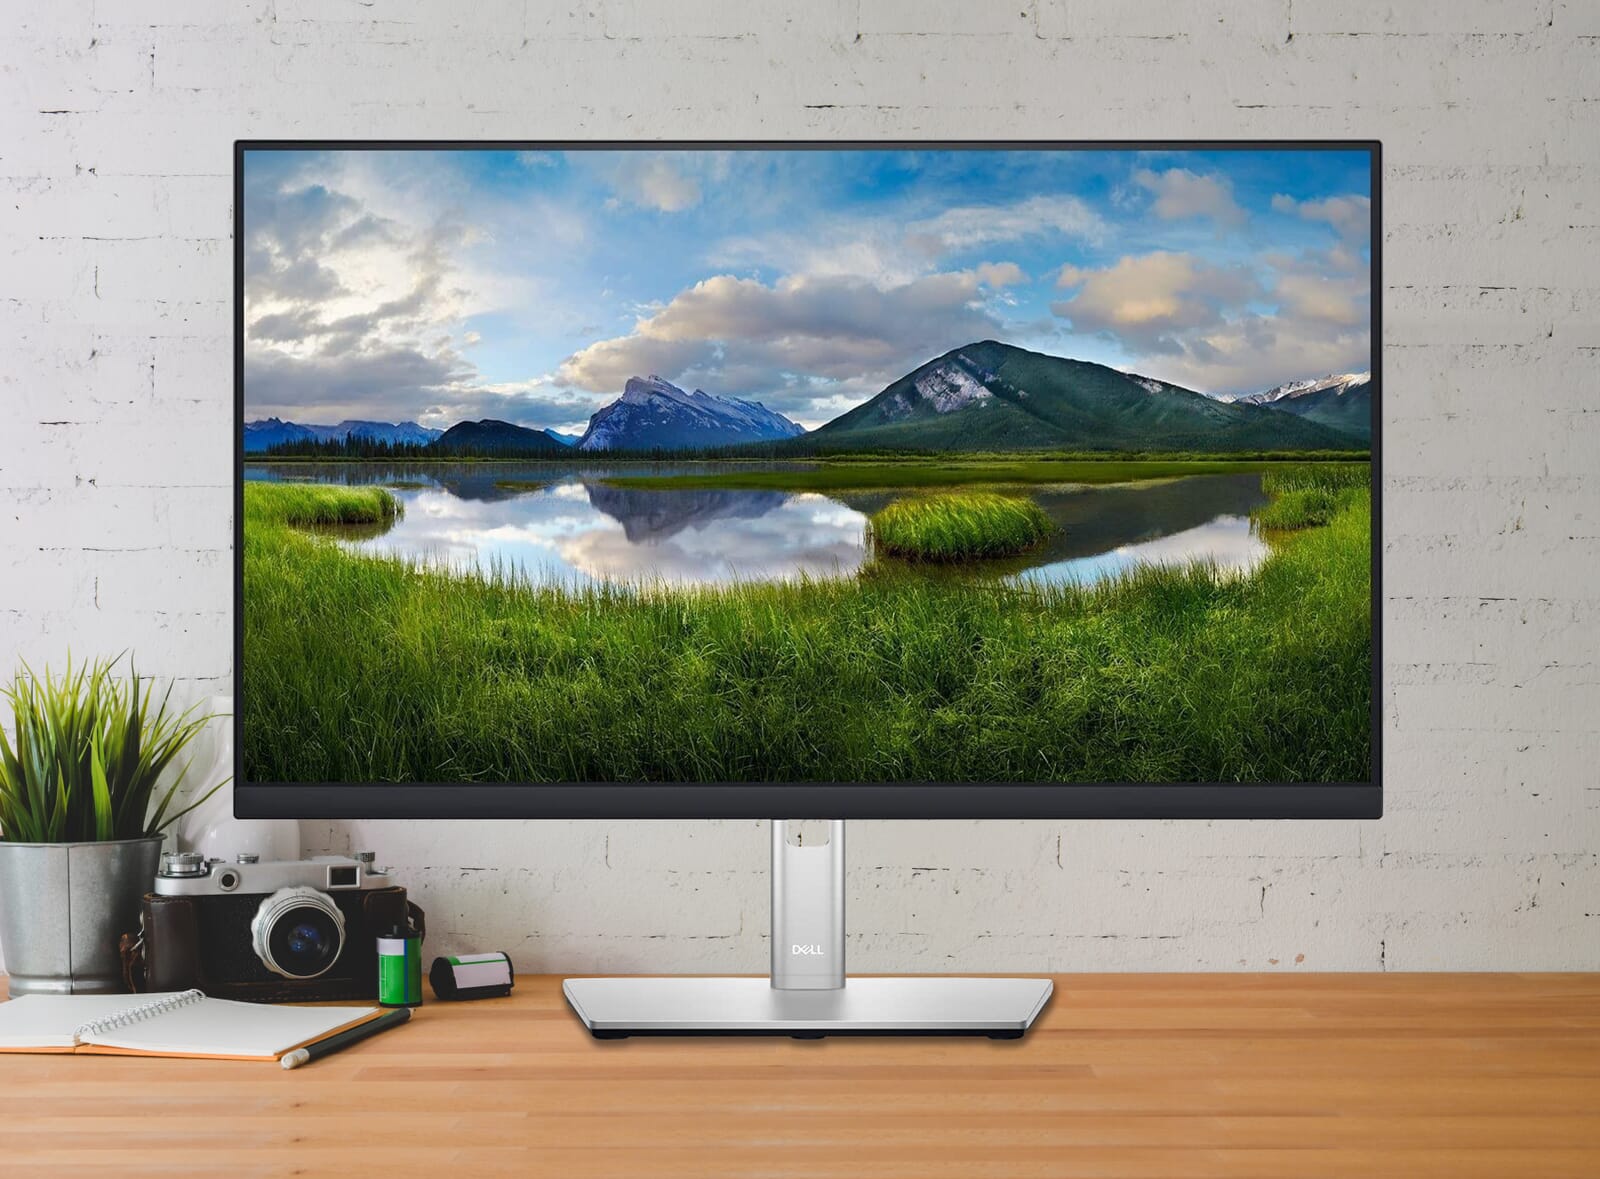 The Dell P2422H 24-inch HD monitor screen is perfect for working through those long days, optimising your eye comfort with a built-in screen that reduces blue light emissions.